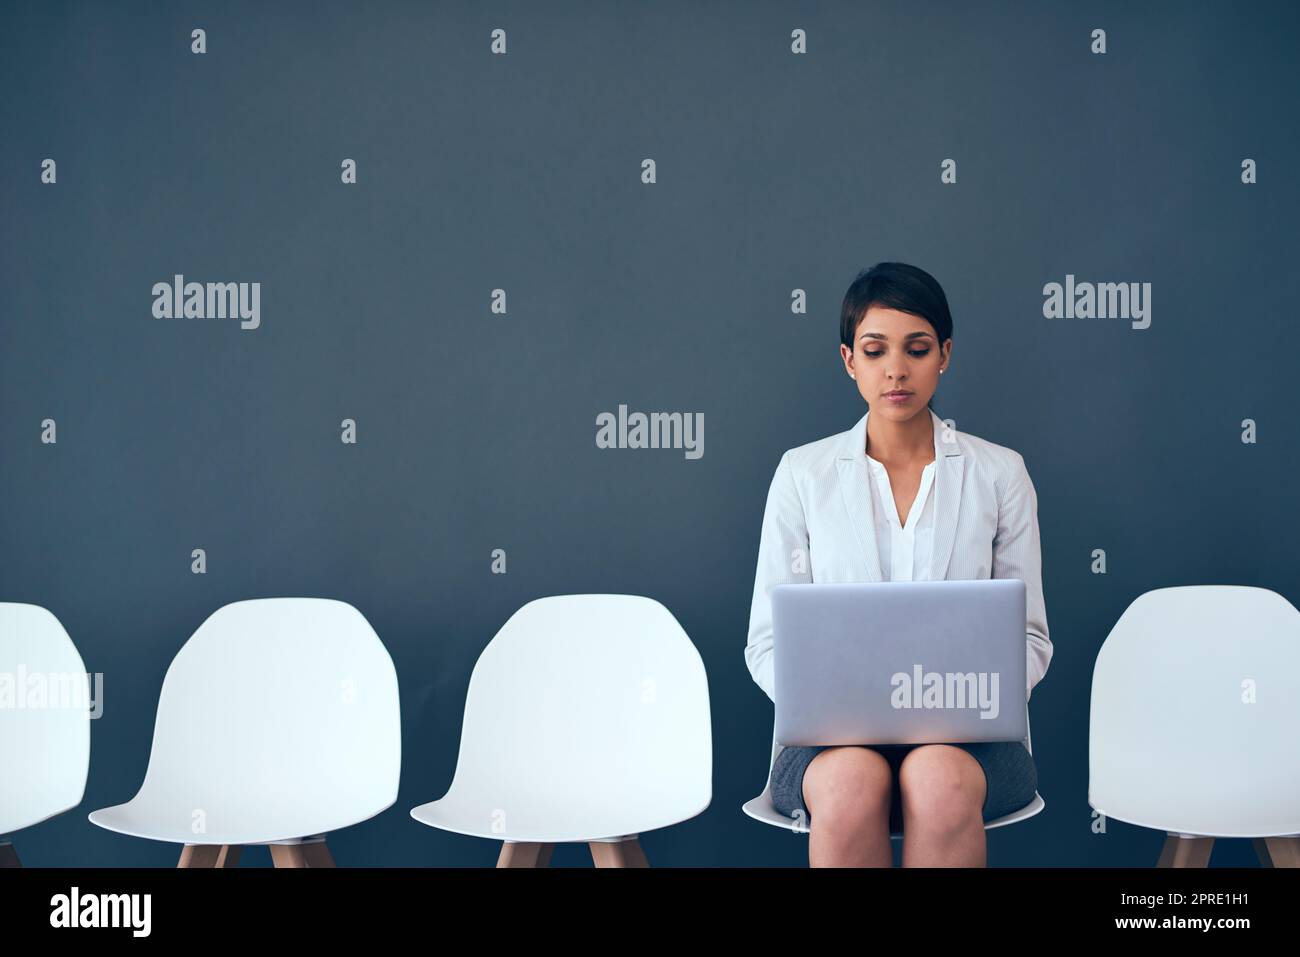 Shes the last one waiting. Studio shot of an attractive corporate businesswoman using a laptop while waiting in line against a gray background. Stock Photo